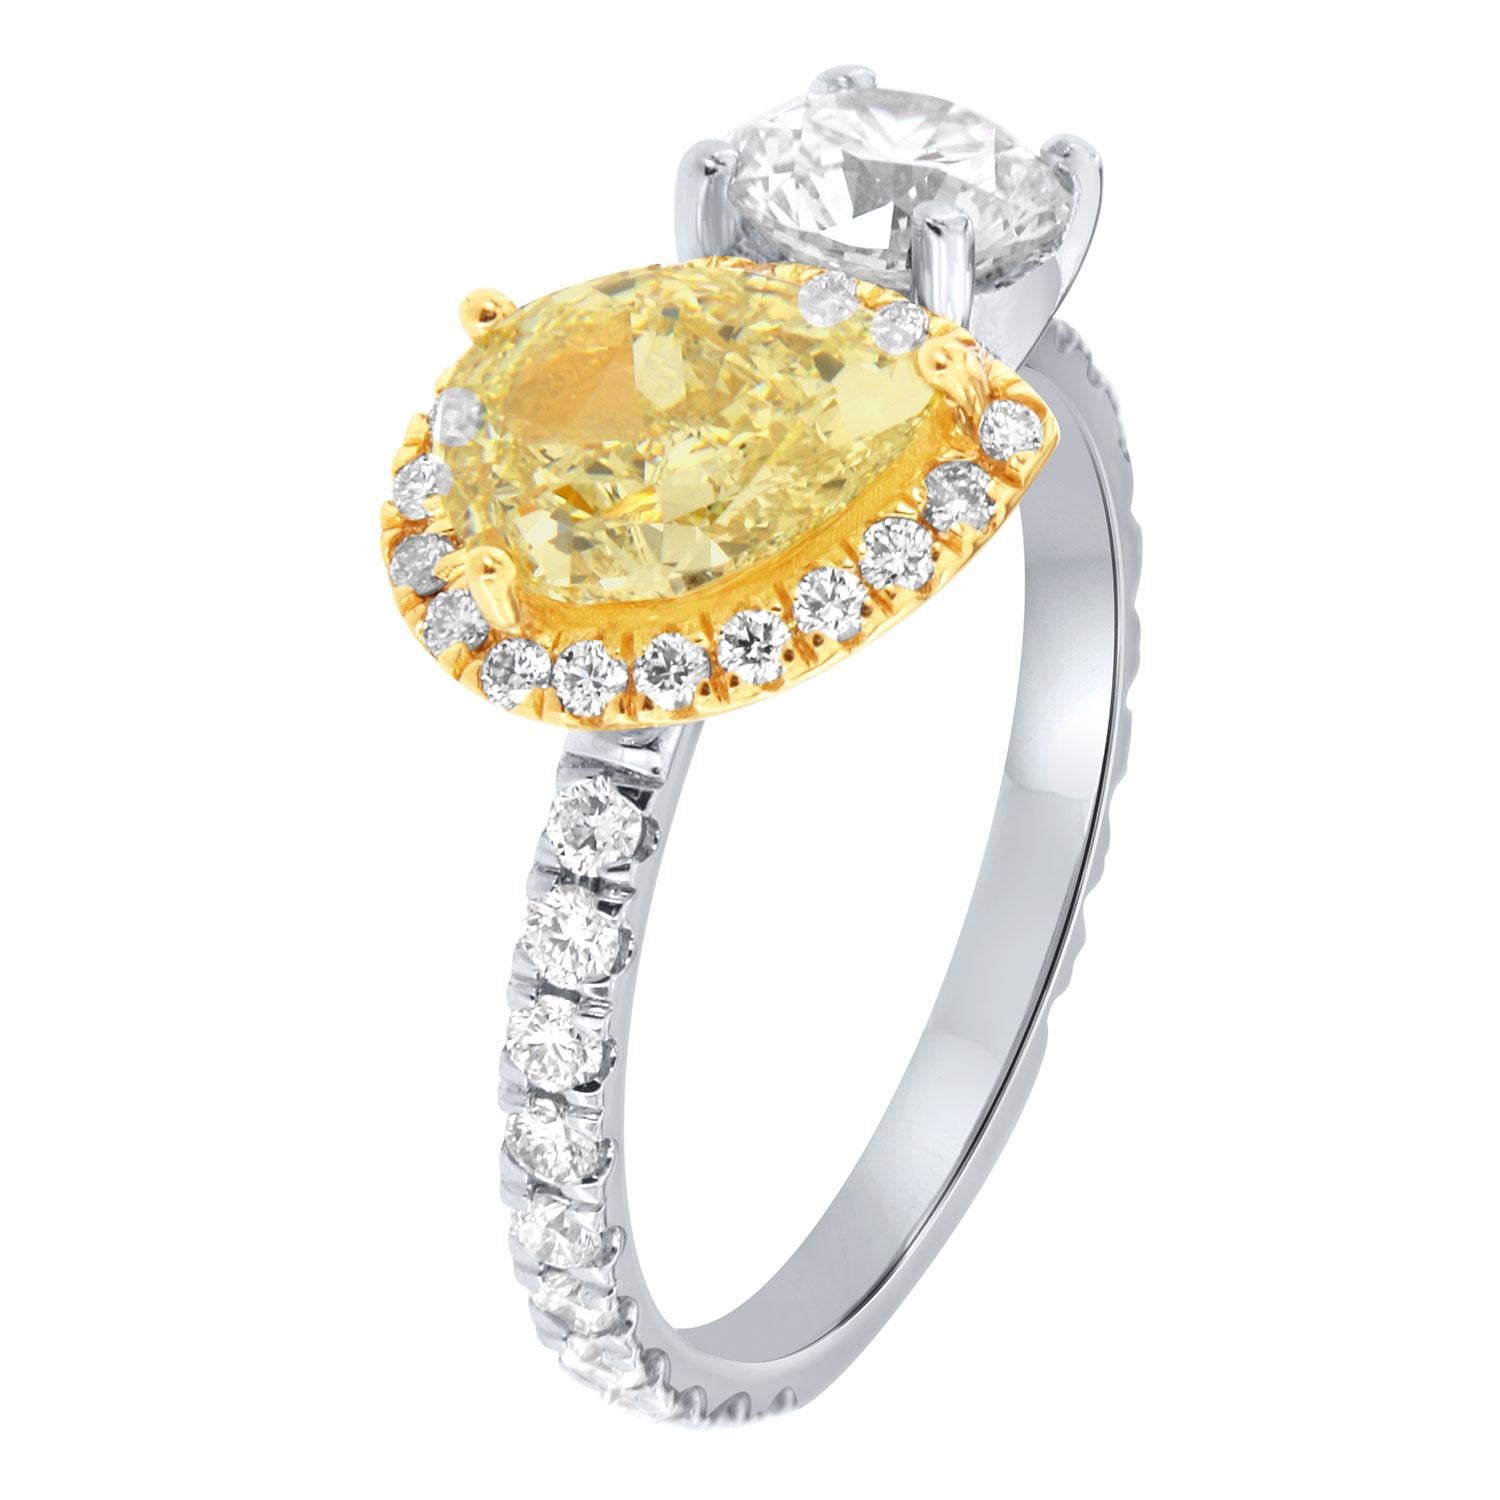 This stunning A-Symmetric ring features 1.51 Carat Fancy Yellow Pear shape diaomnd & a 0.88 Carat round-shape white diamond. Both are encircled by brilliant round diamonds on a 2 mm wide diamond band. The diamonds are micro prongs set on 3/4 of the